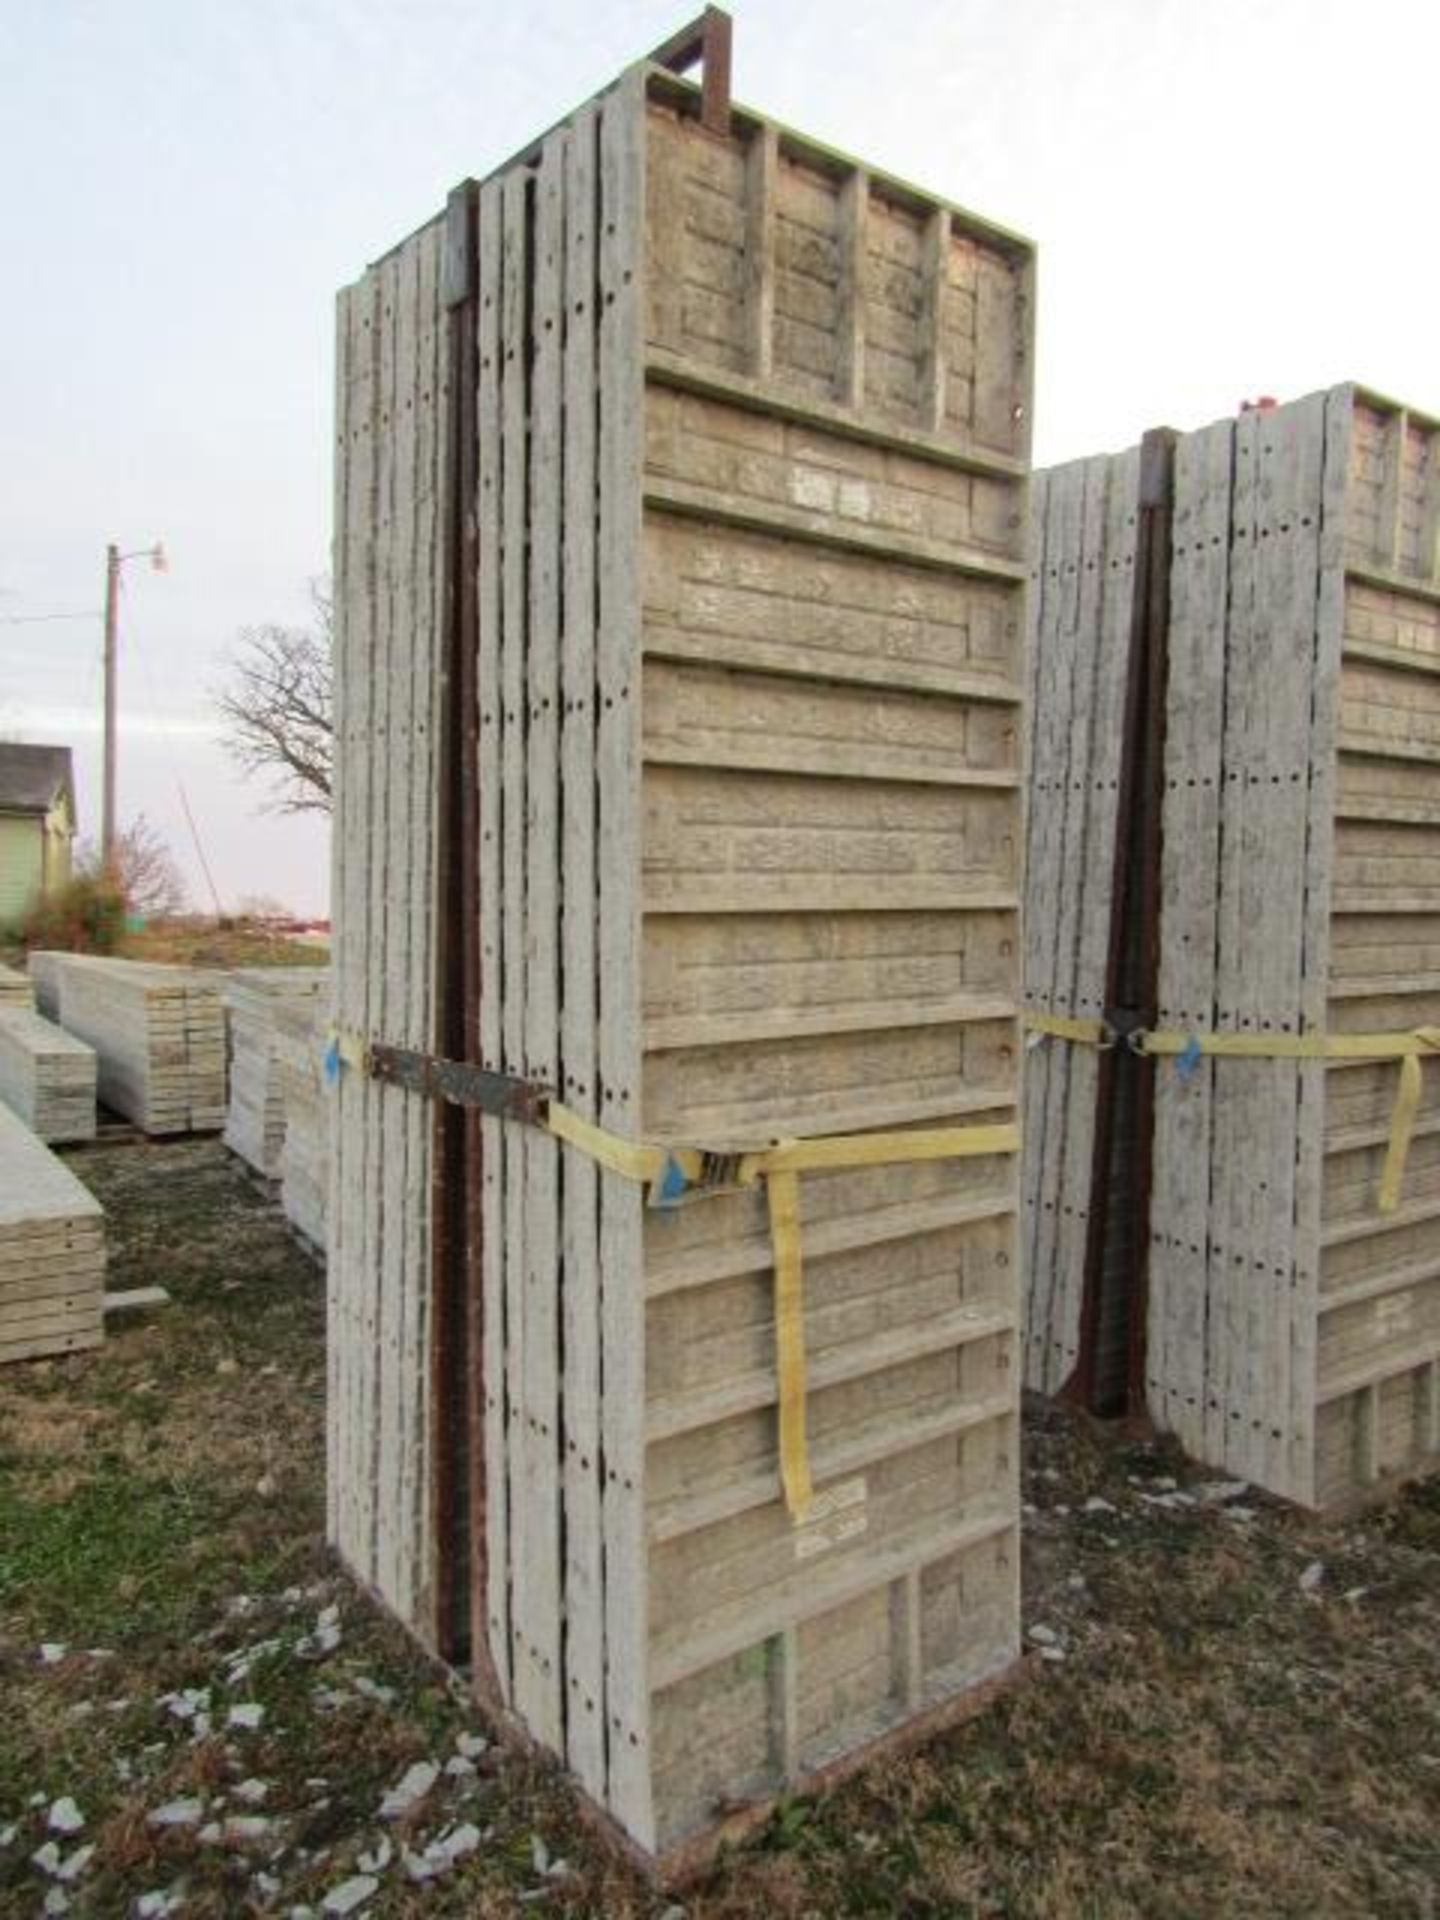 (16) 36" x 9' Precise Concrete Forms, Textured Brick 8" Hole Pattern, Located in Winterset, IA - Image 2 of 3